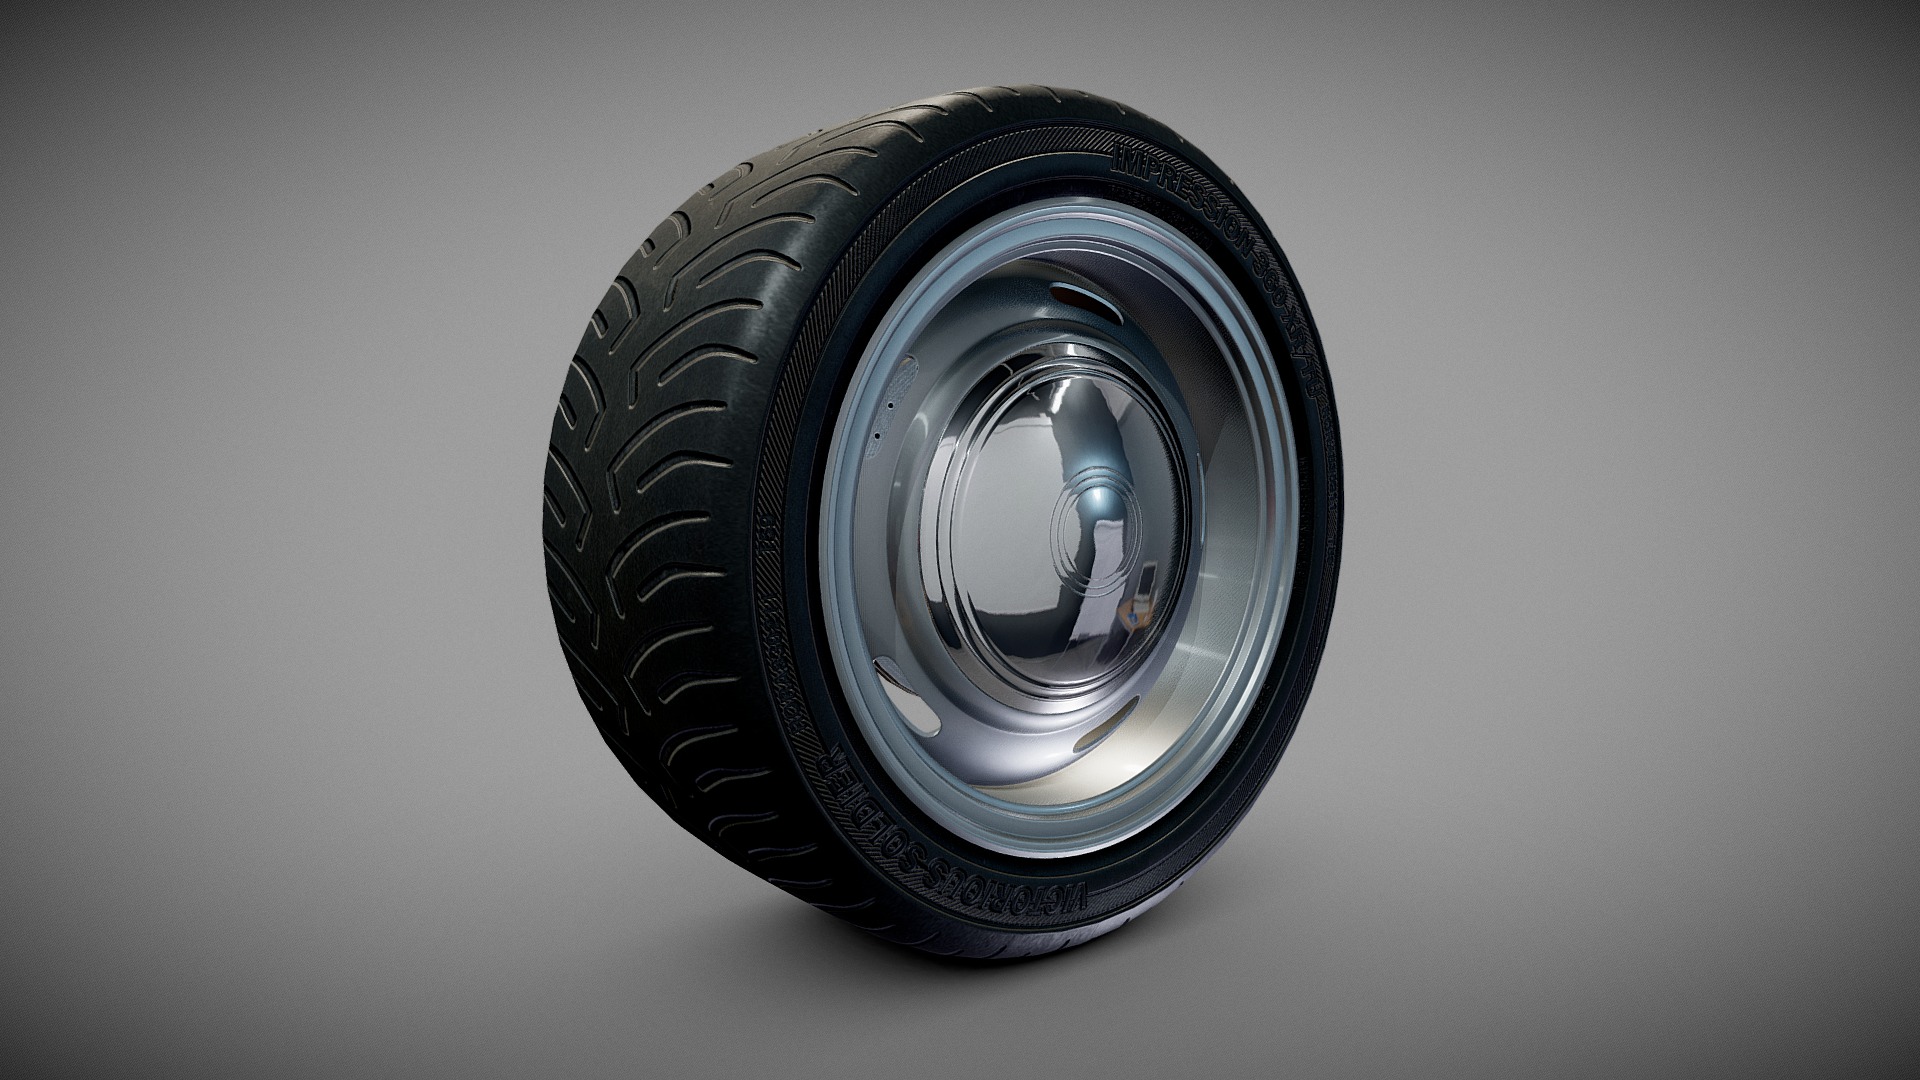 3D model Tyre & Rim American Muscle Rally - This is a 3D model of the Tyre & Rim American Muscle Rally. The 3D model is about a tire on a white surface.